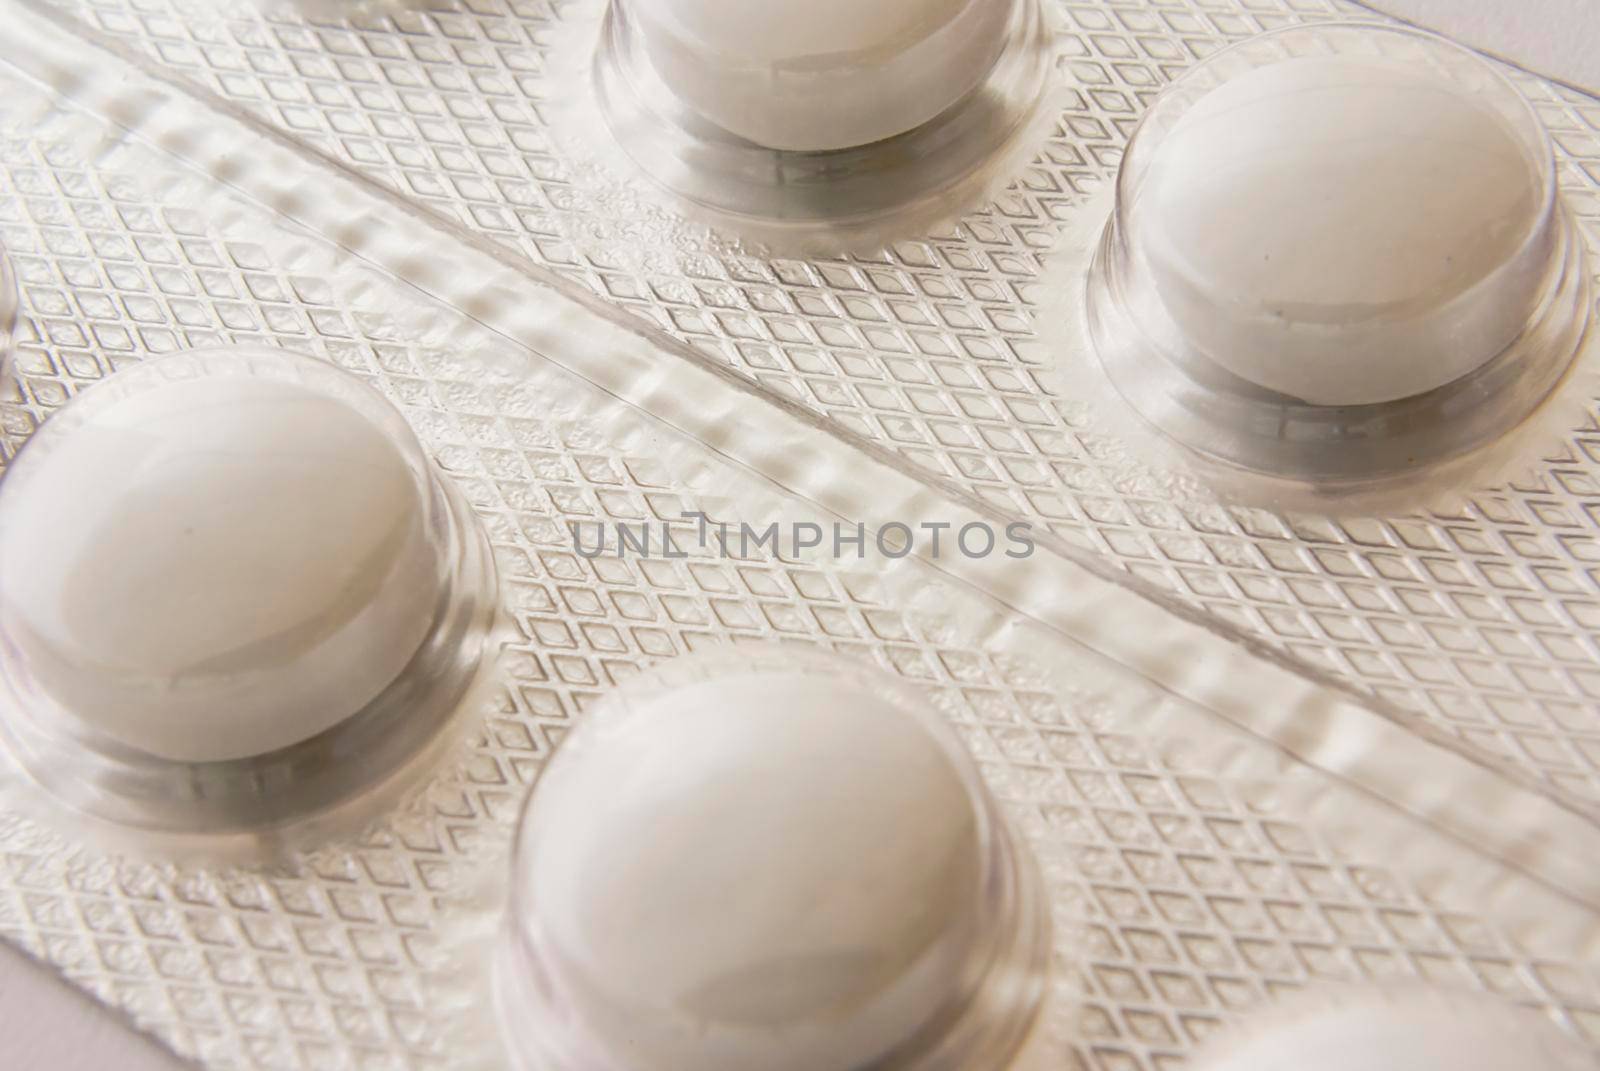 Some white round pills in a metallic blister